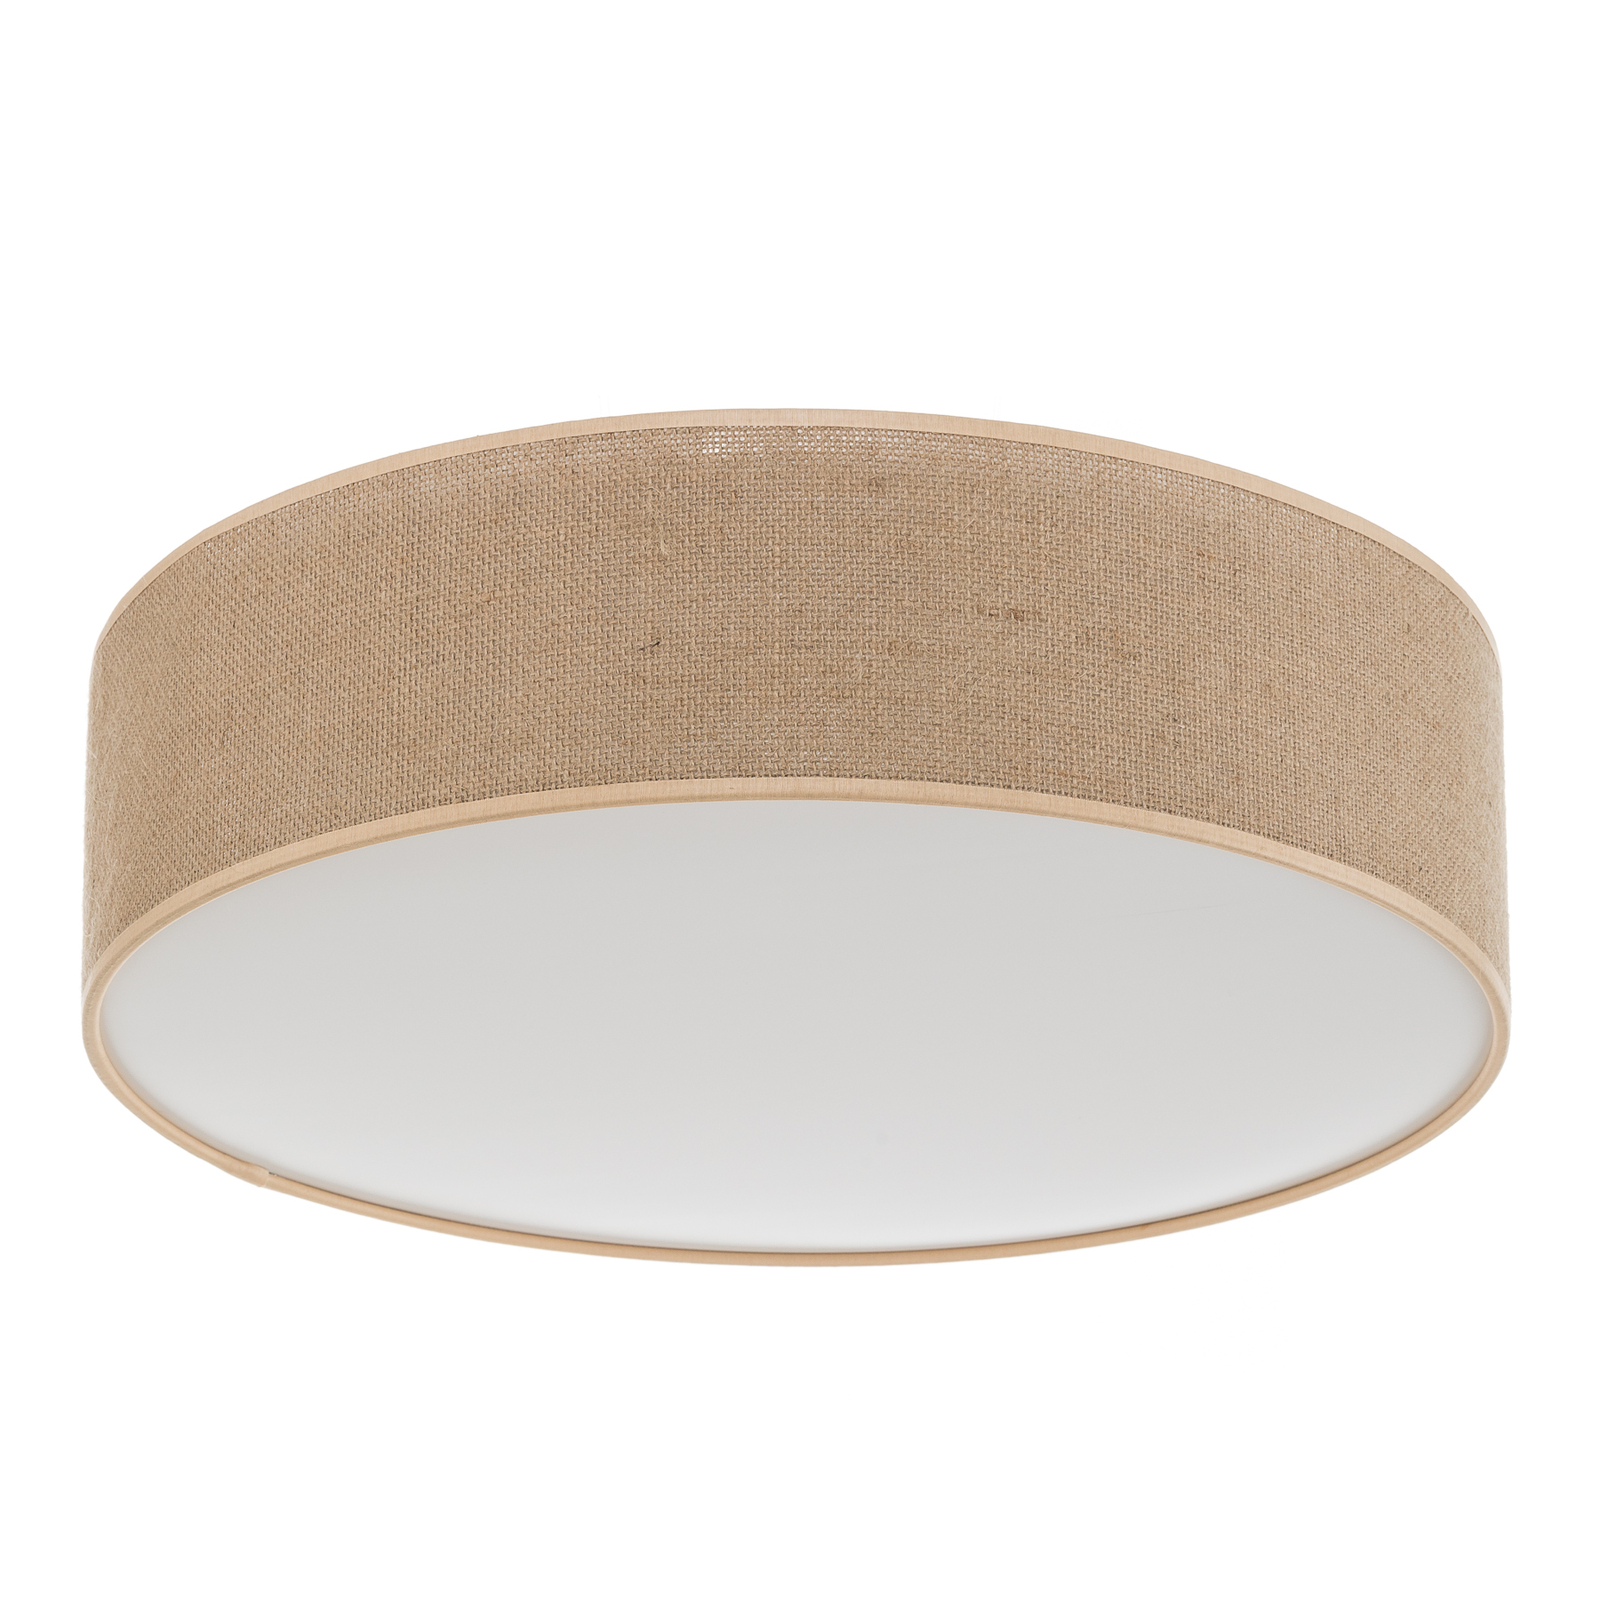 Jute ceiling light with a beige lampshade, Ø 48 cm